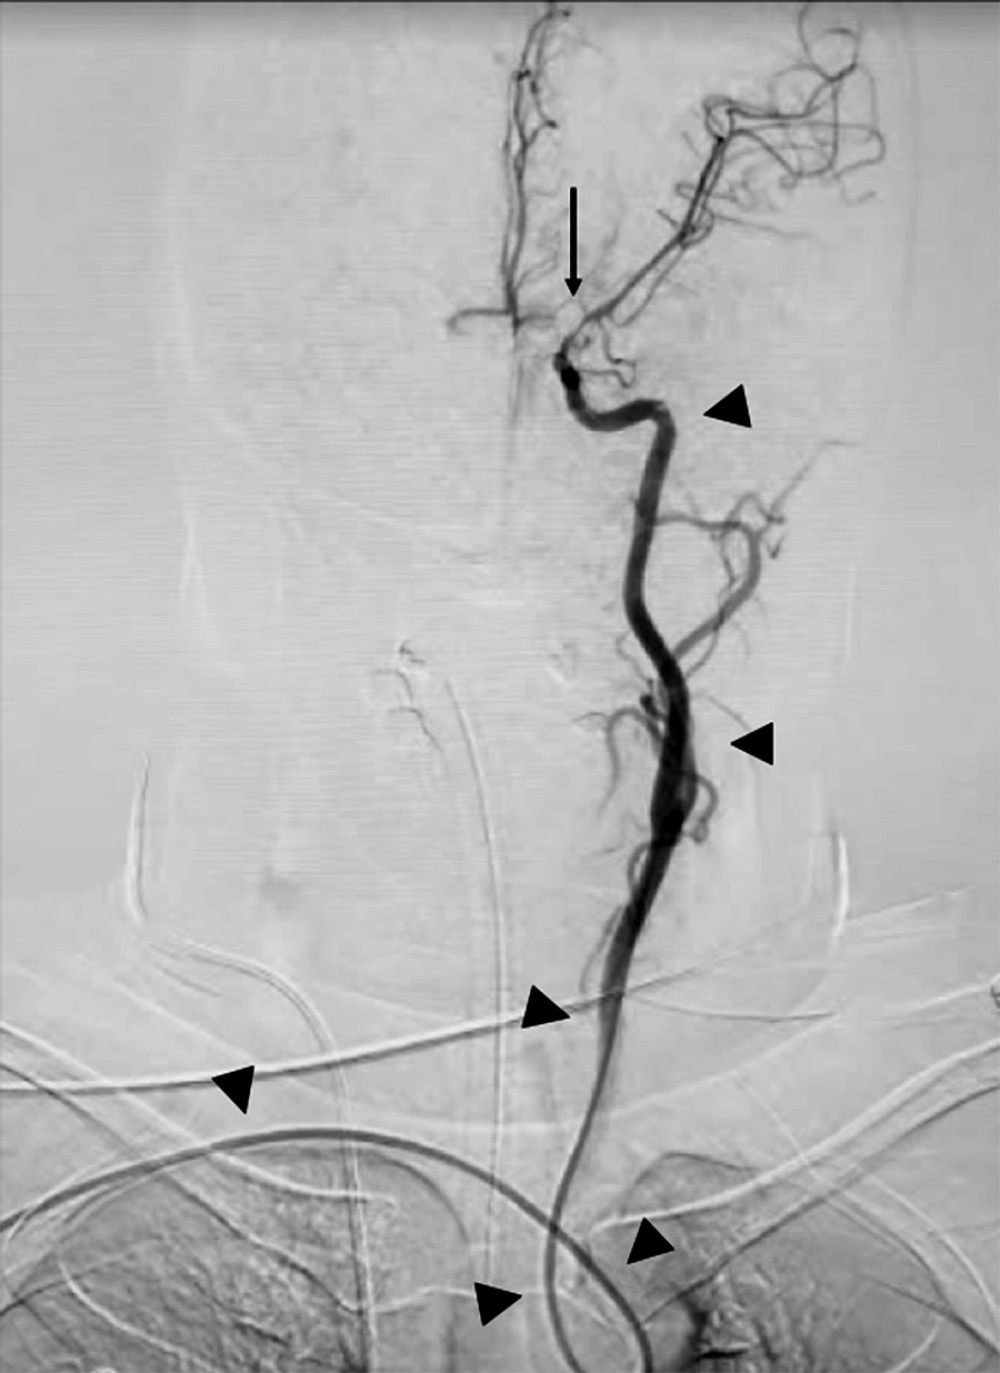 Final anteroposterior angiography shows the trajectory of the intracranial support catheter (arrowheads) and the aneurysm occluded (arrow).